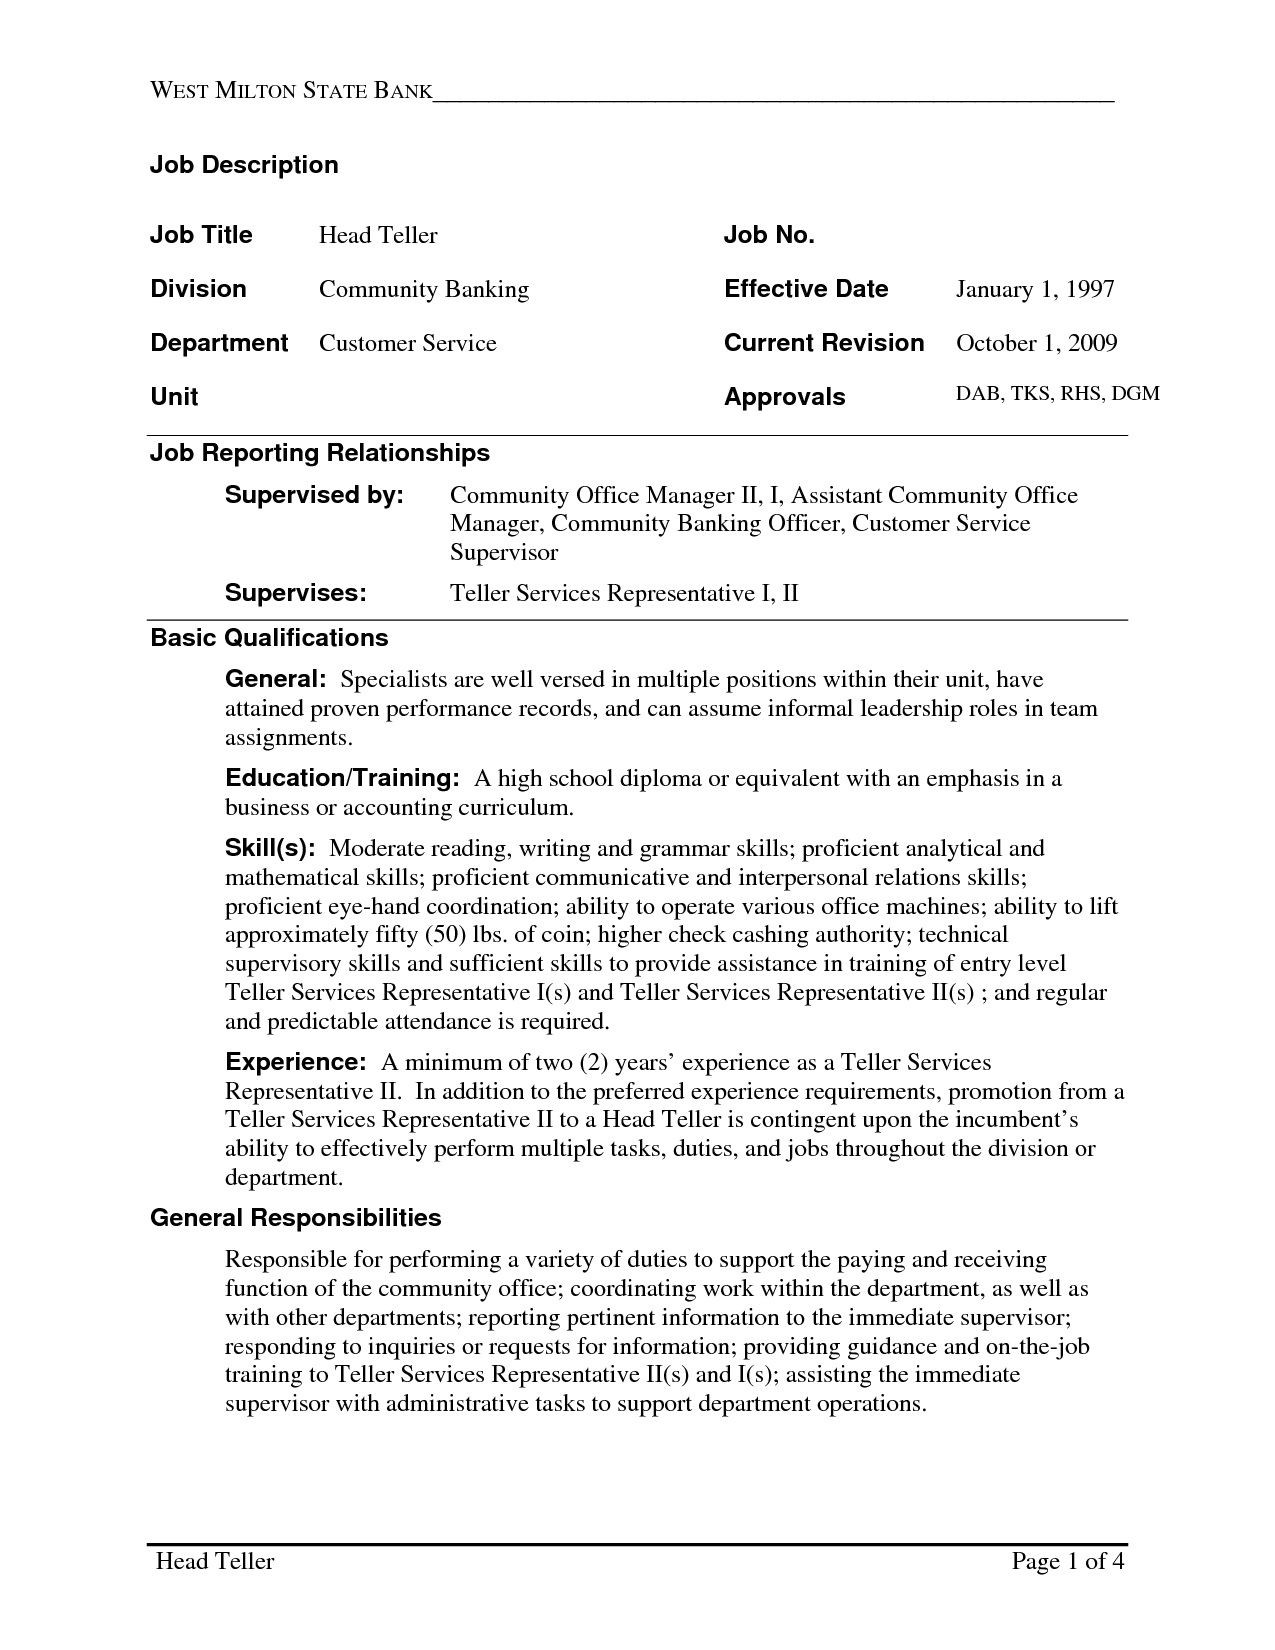 Sample Resume for Banking and Finance Fresh Graduate Bank Teller Resume with No Experience Latest Resume format